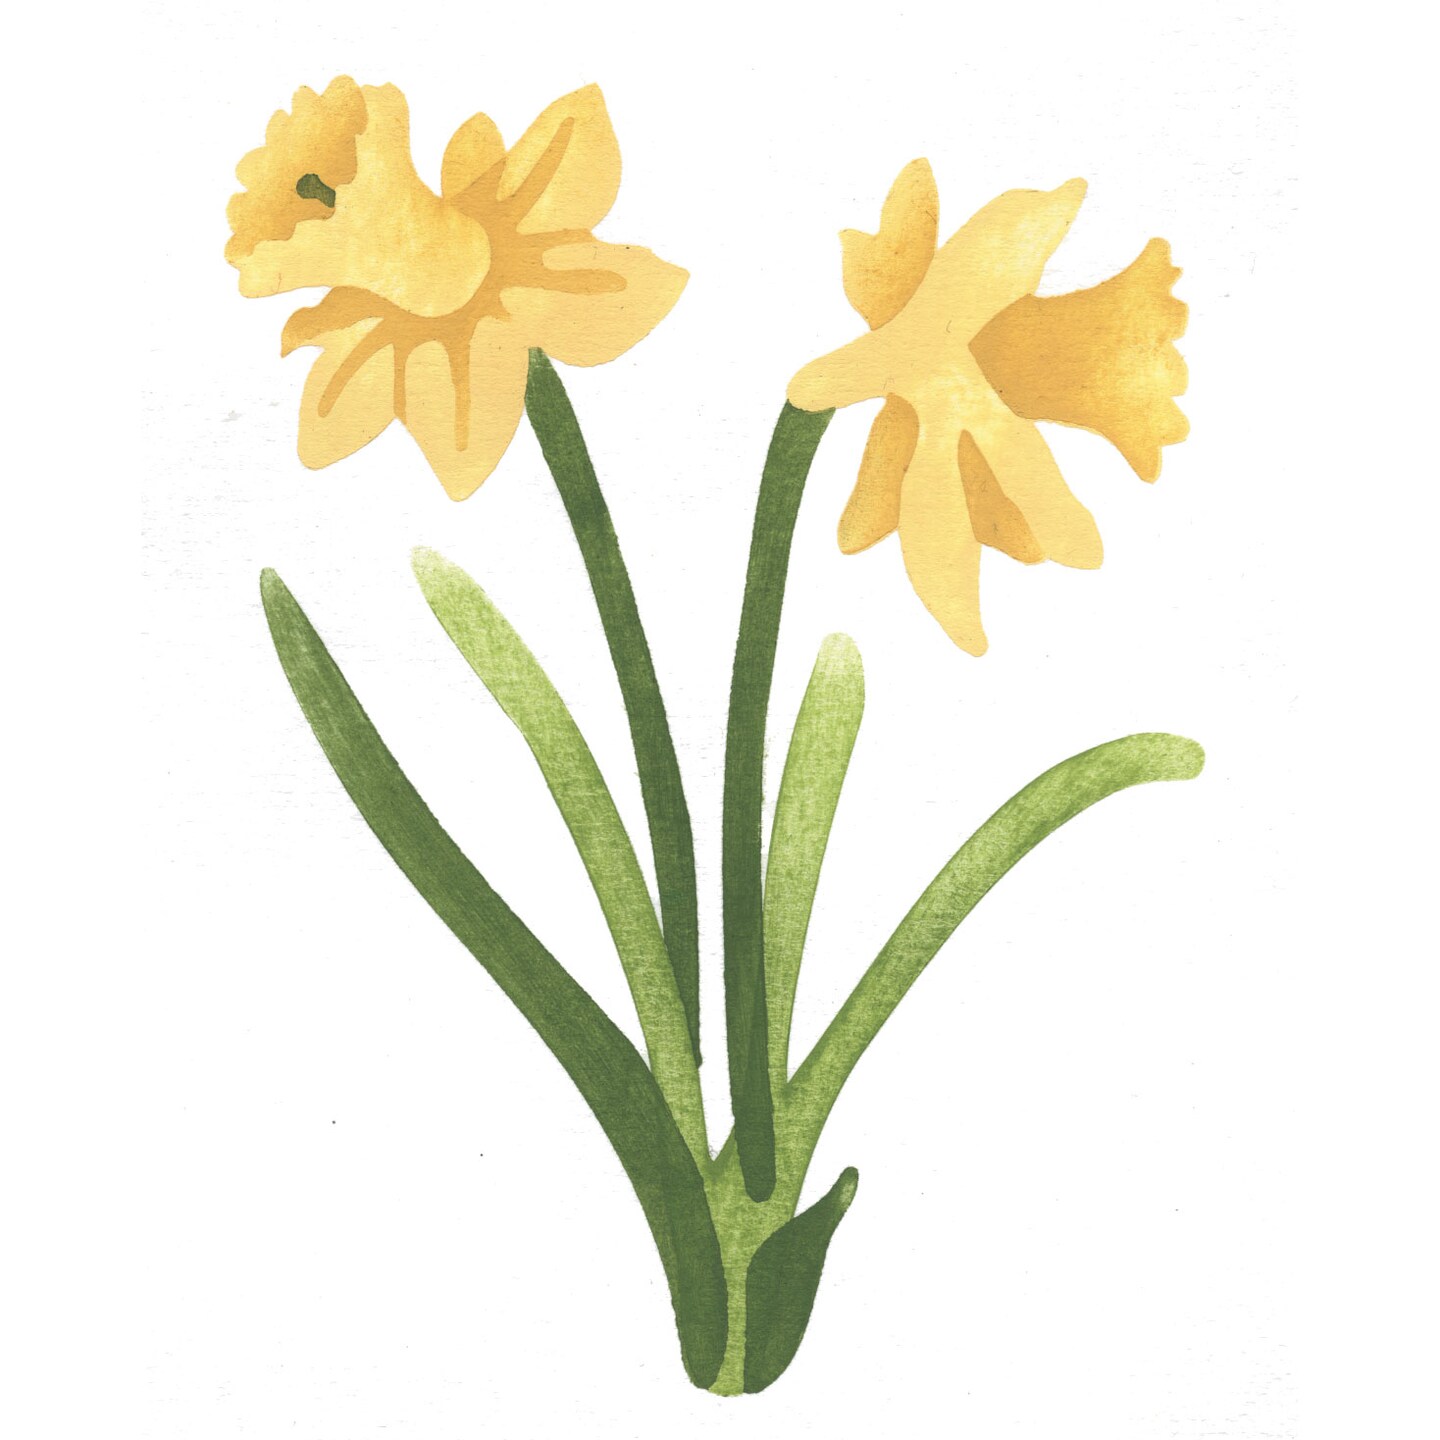 Large Daffodil Wall Stencil | 3040B by Designer Stencils | Floral Stencils | Reusable Art Craft Stencils for Painting on Walls, Canvas, Wood | Reusable Plastic Paint Stencil for Home Makeover | Easy to Use &#x26; Clean Art Stencil